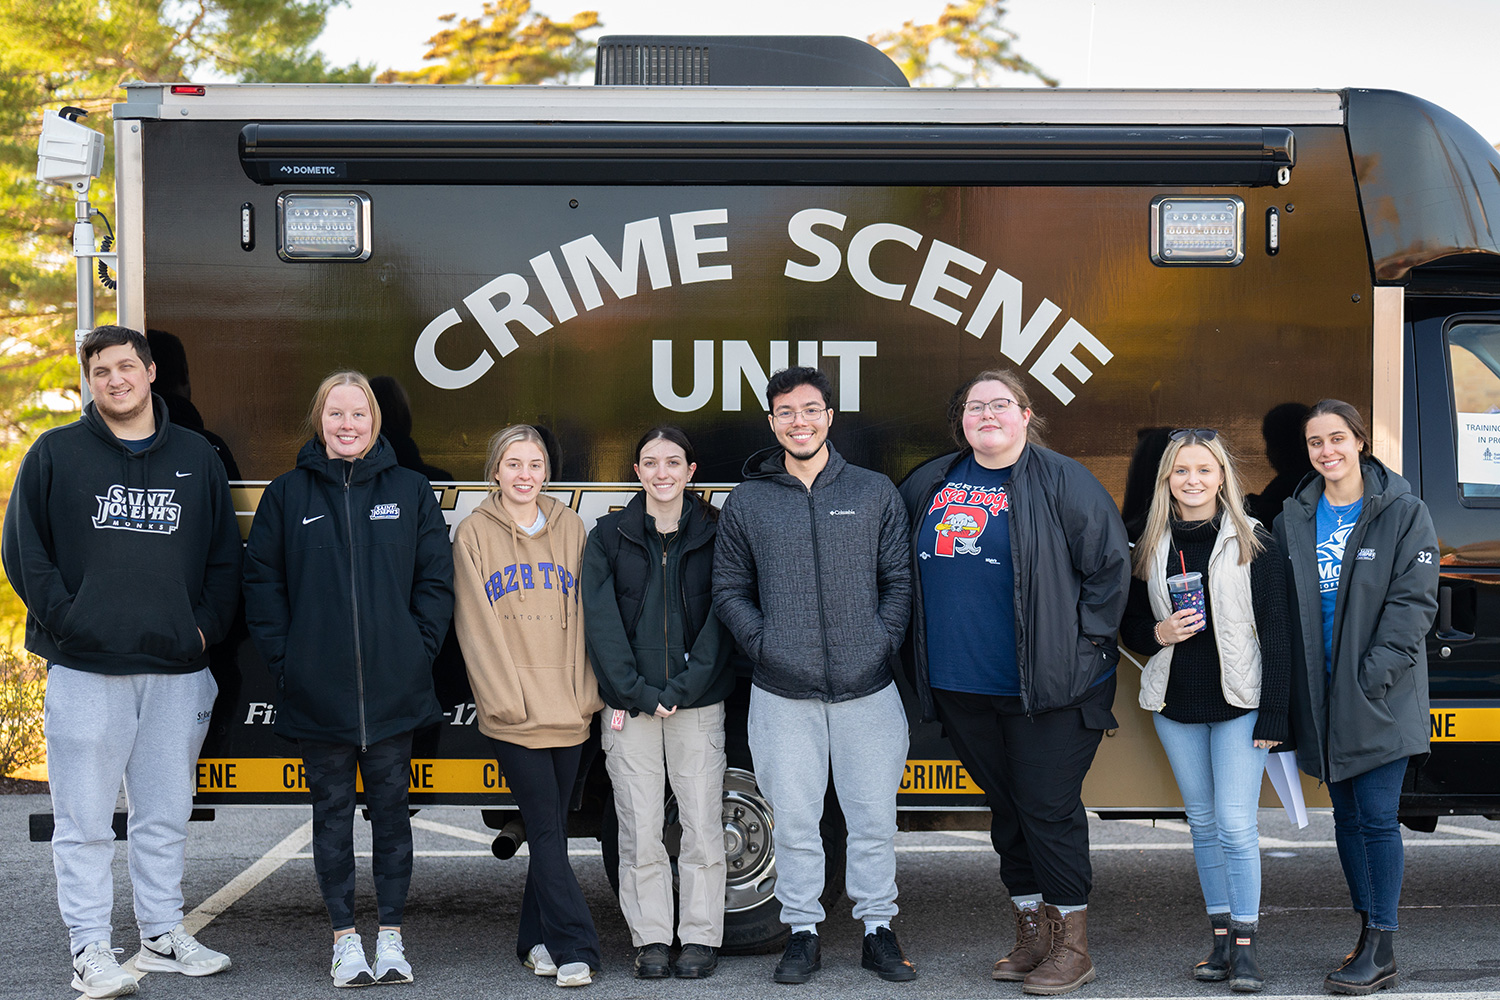 Group of Criminal Justice students from the crime scene mock investigation.